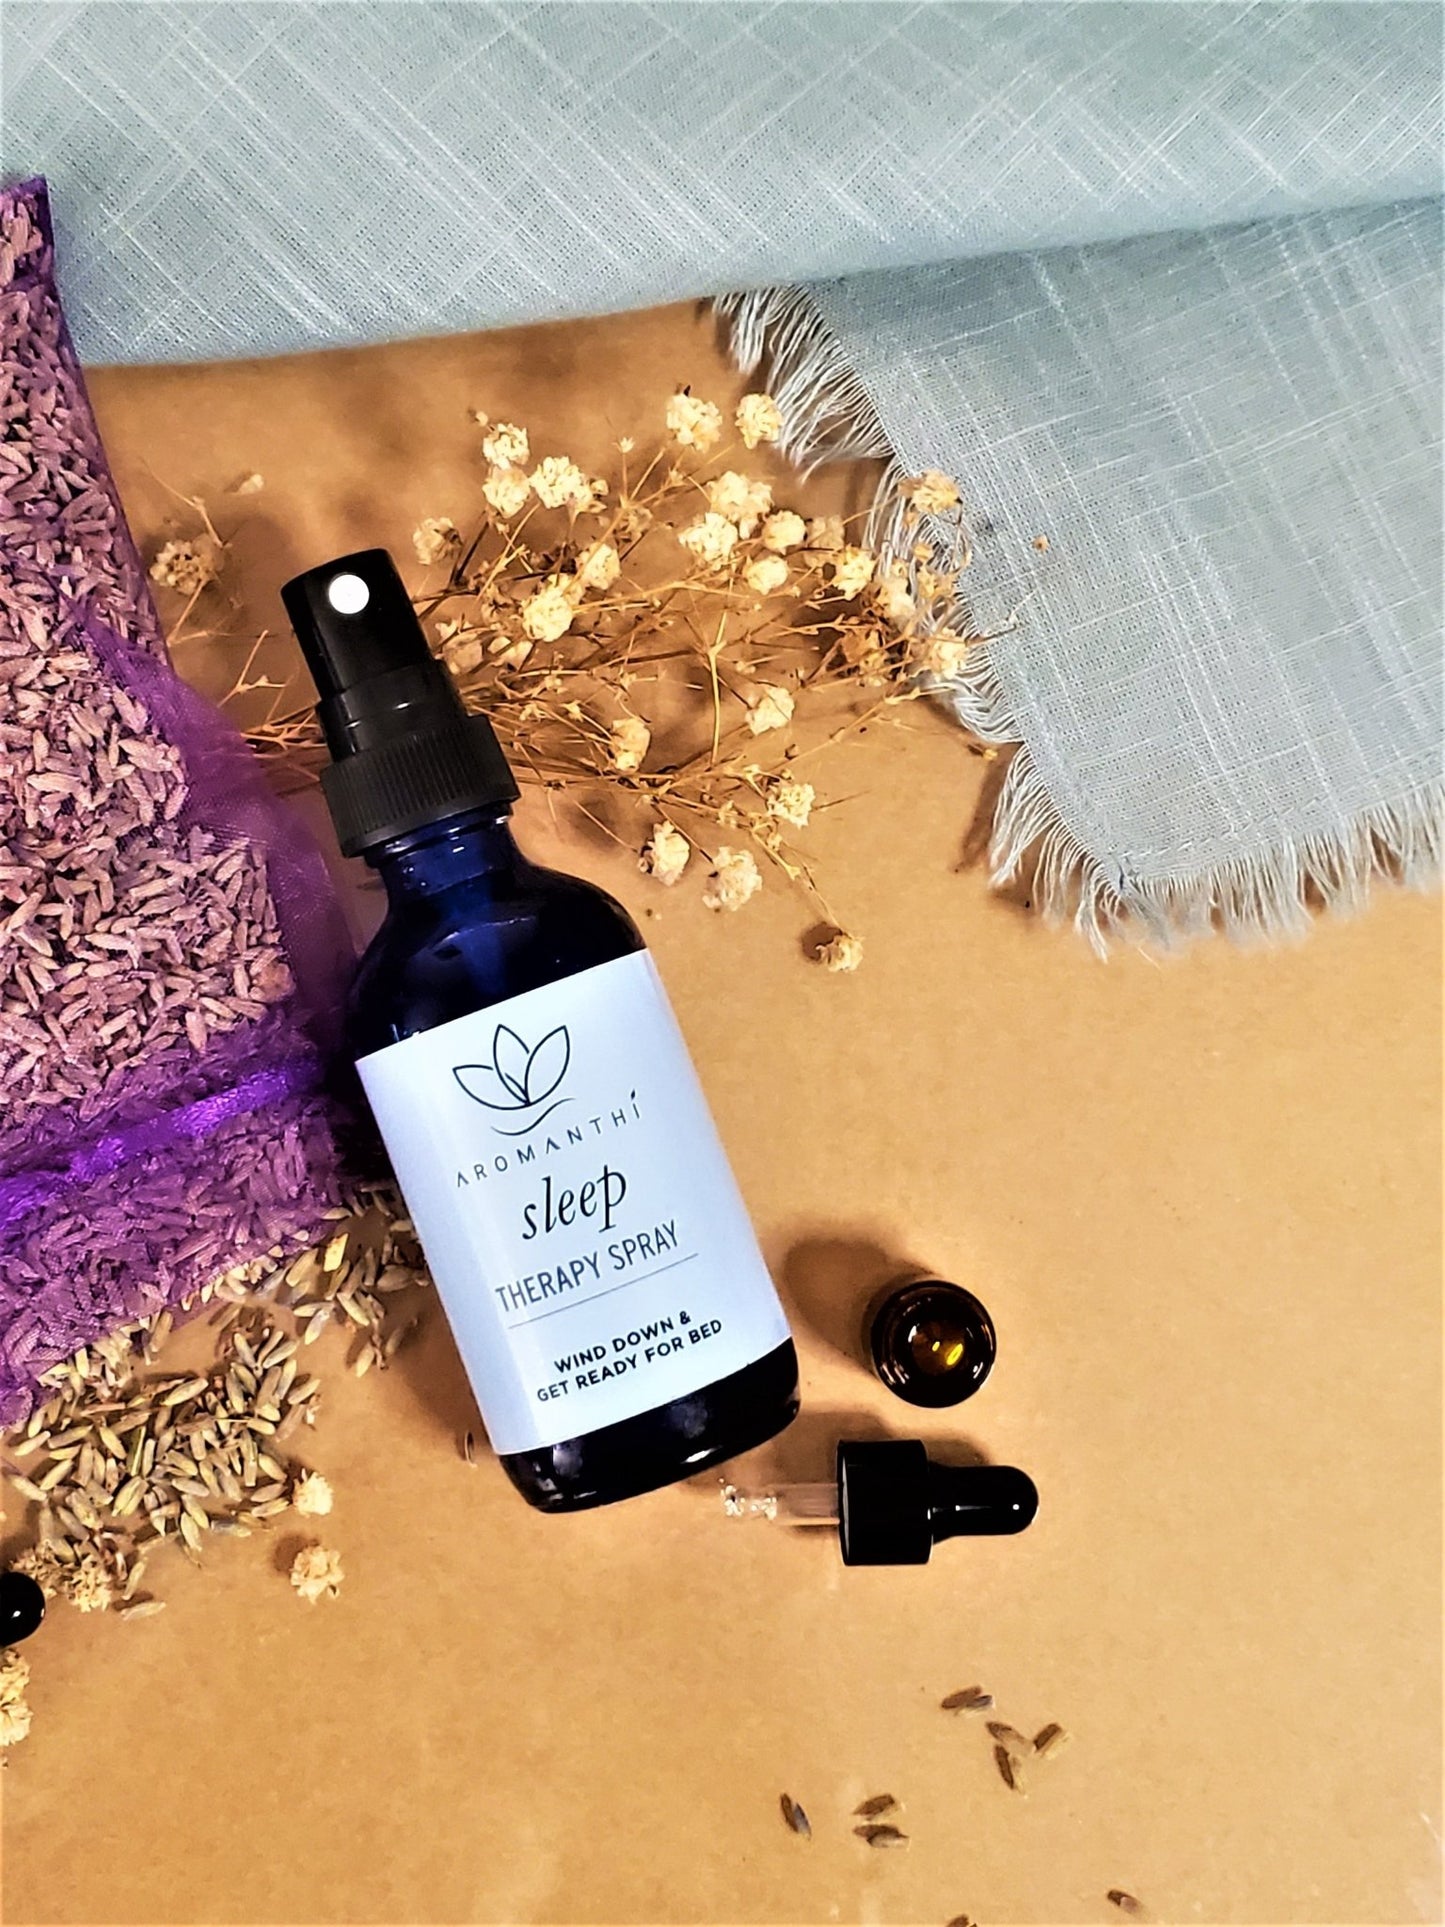 Sleep Therapy Spray laying against a tan backdrop surrounded by dry chamomile and lavender flower petals